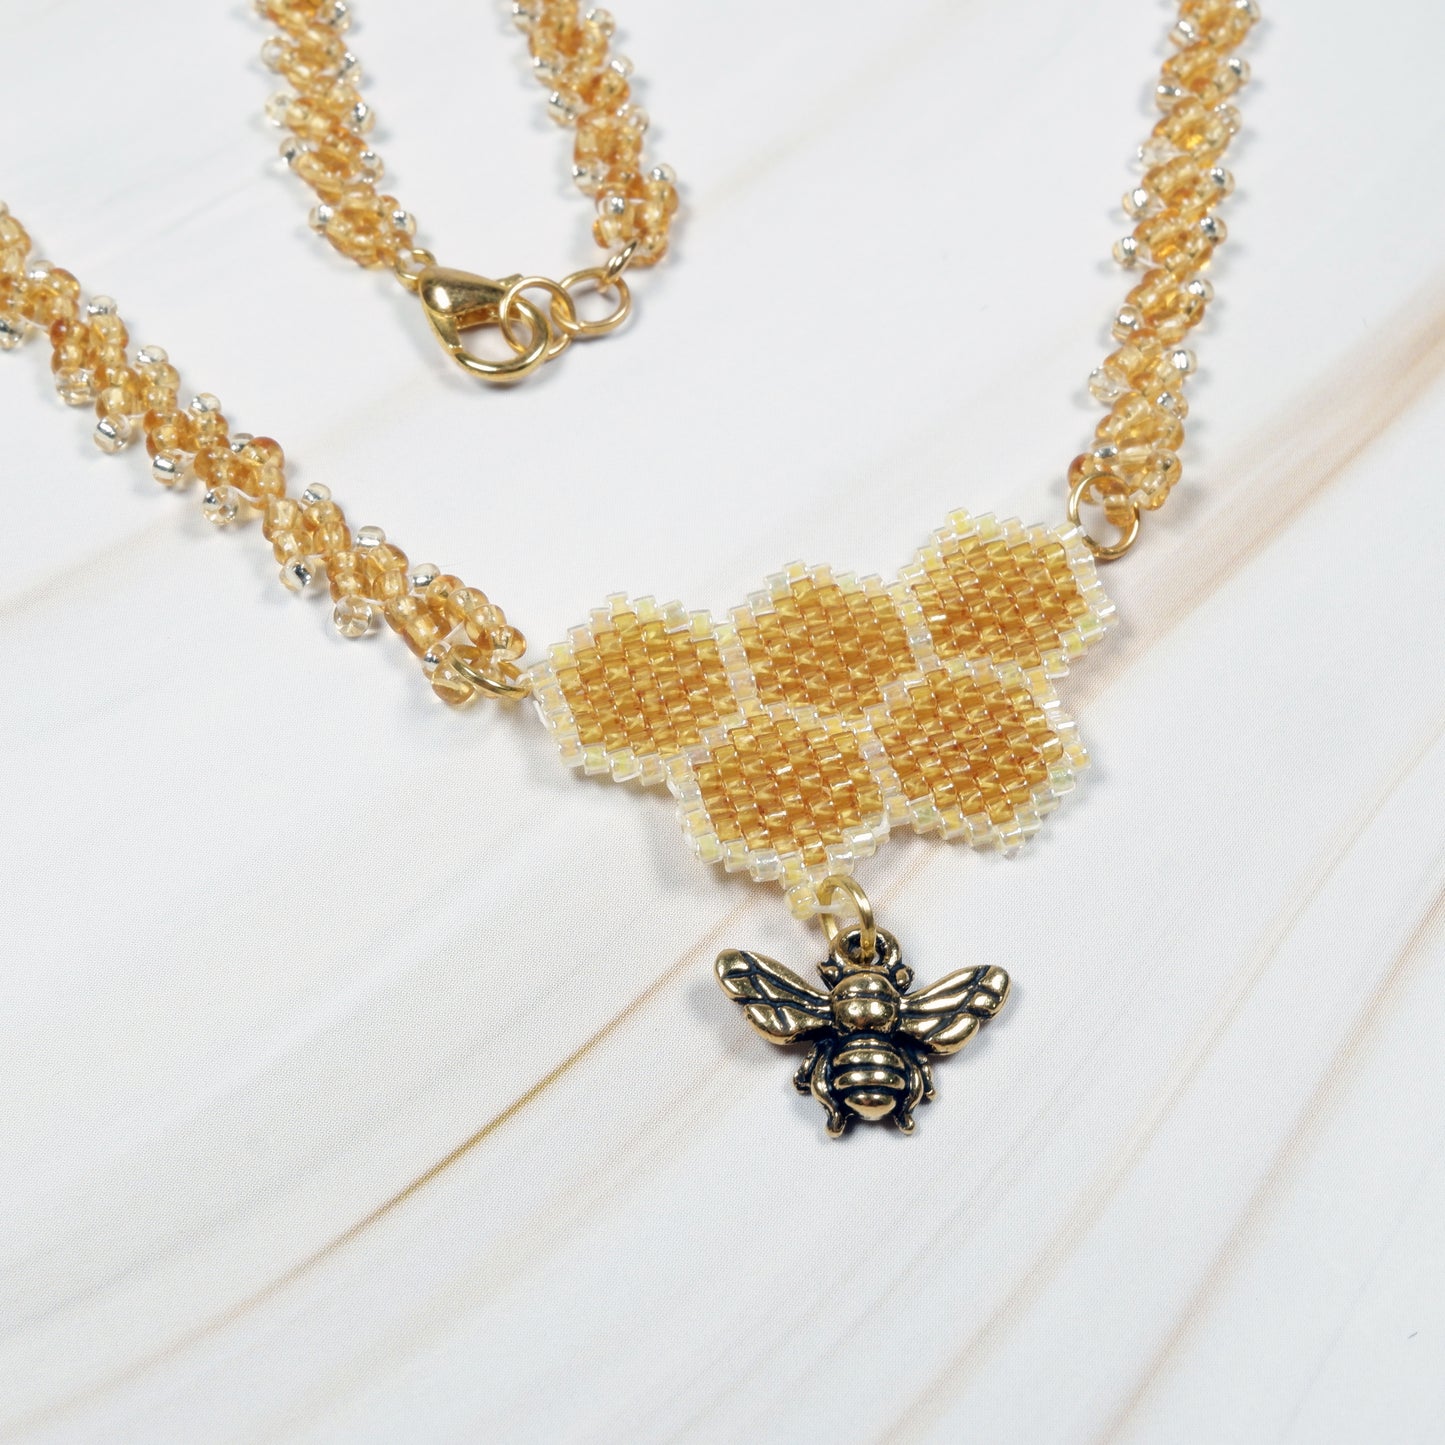 Honeycomb Necklace with Bee